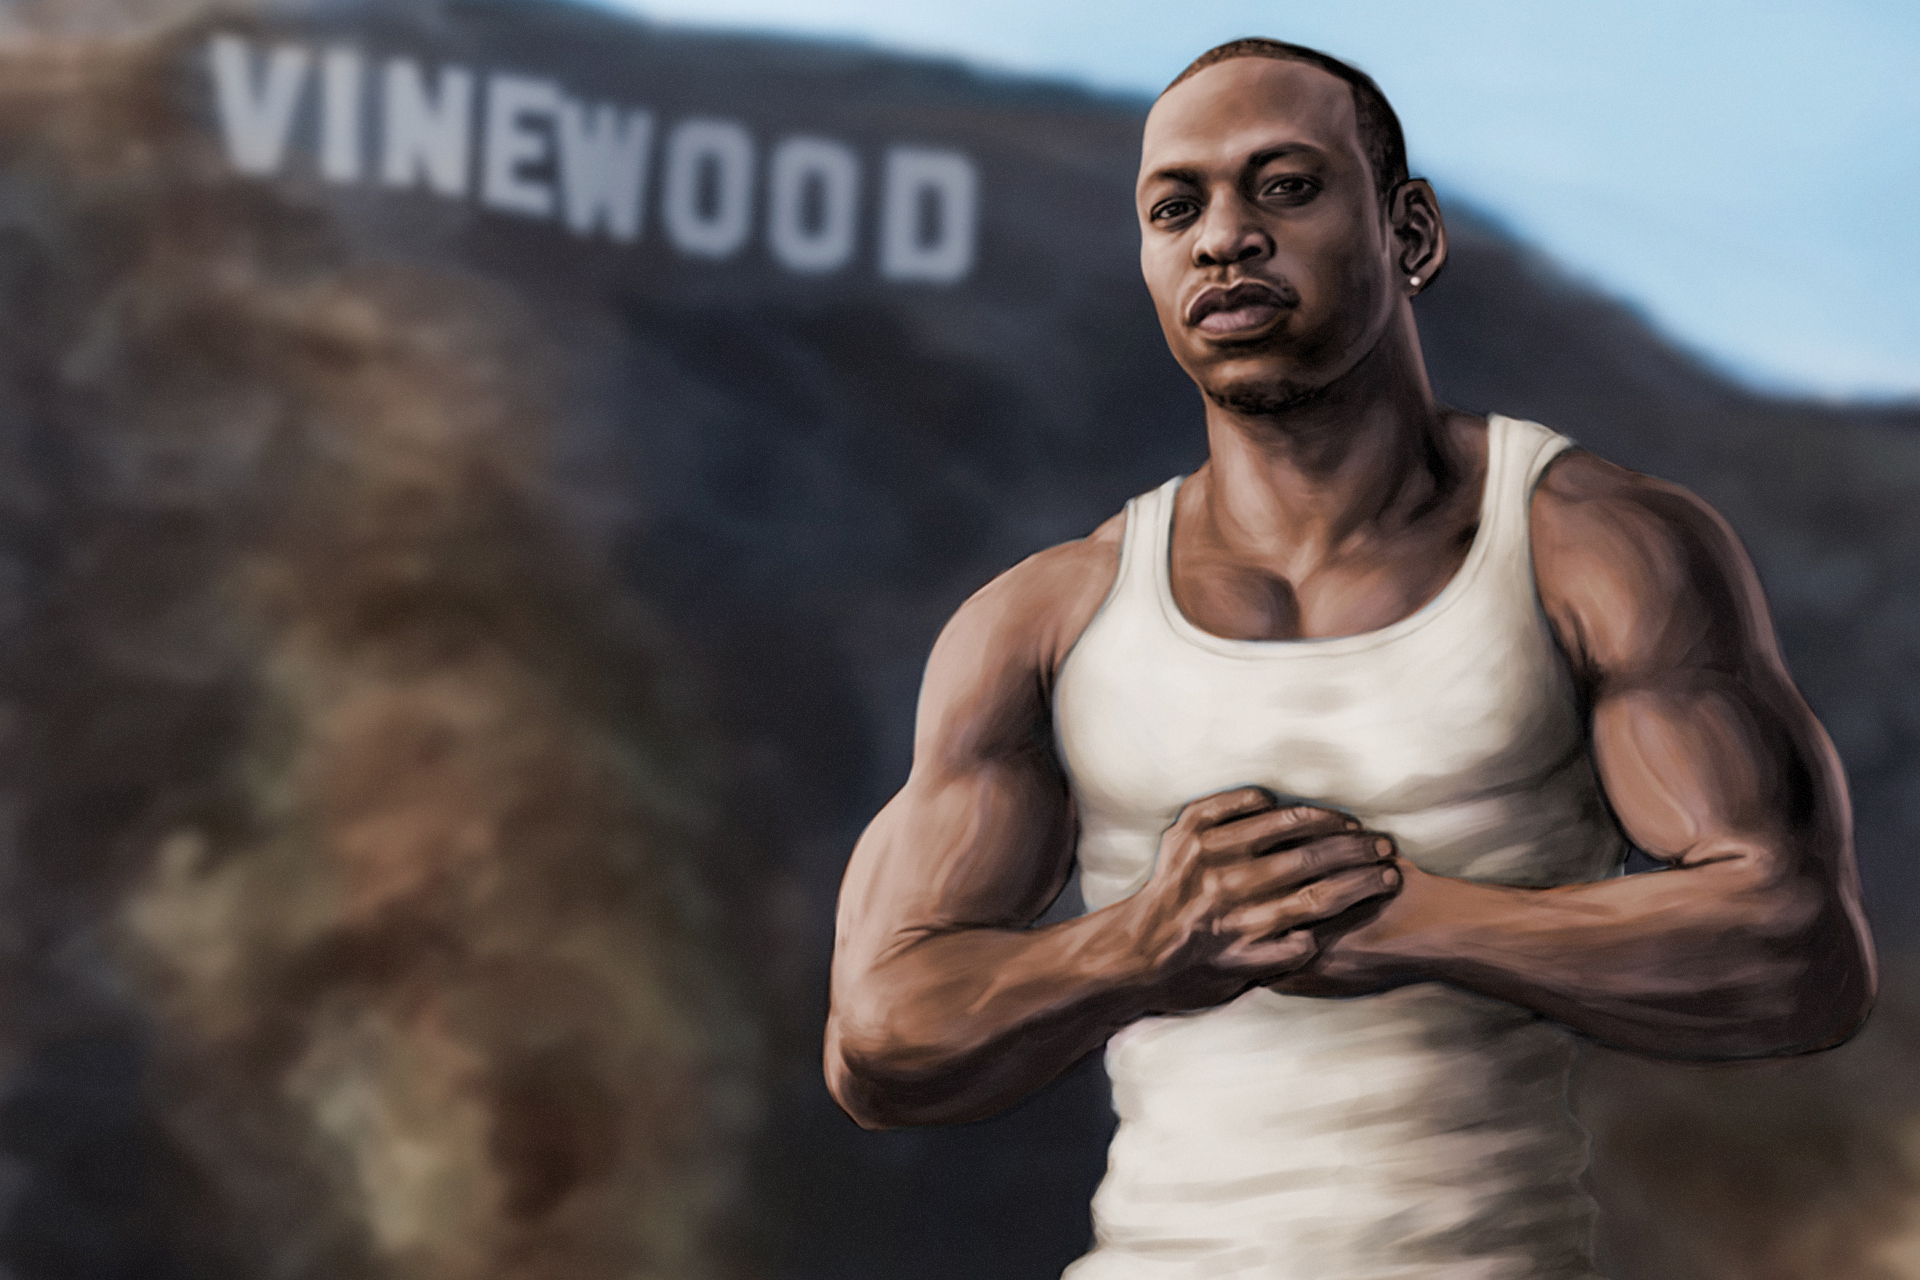 GTA 6 to will Change the Voice Actor for Carl “CJ” Johnson